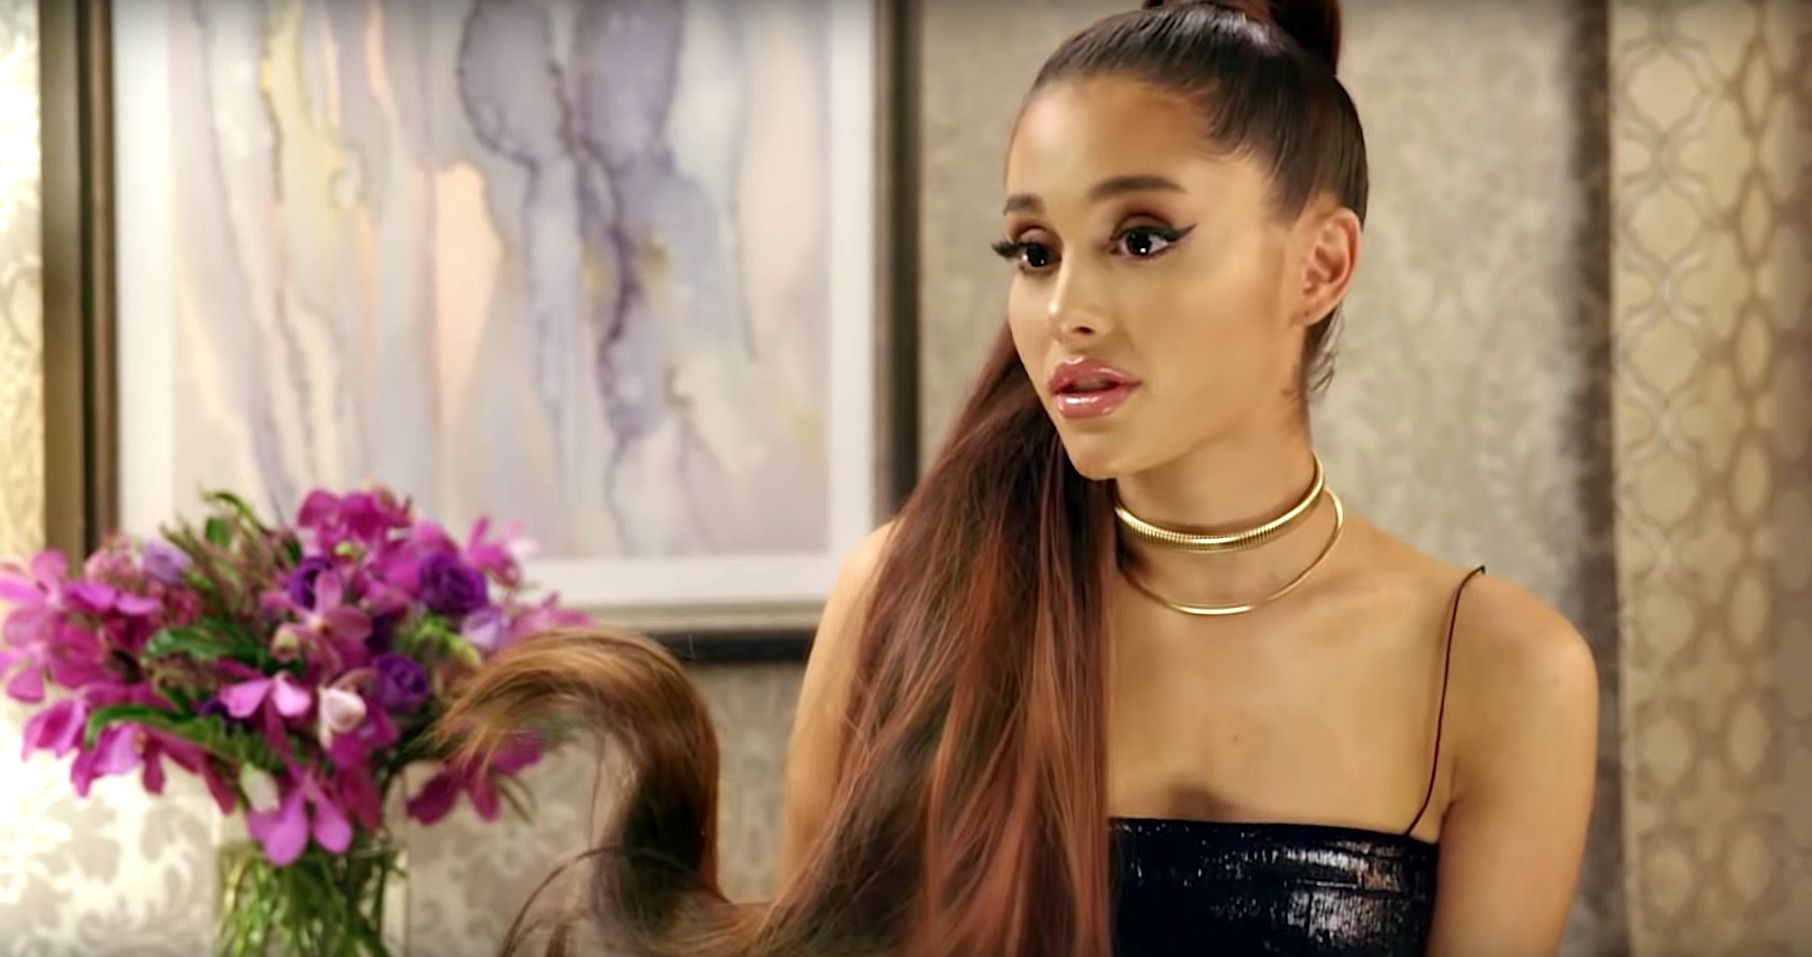 better off ariana grande free download